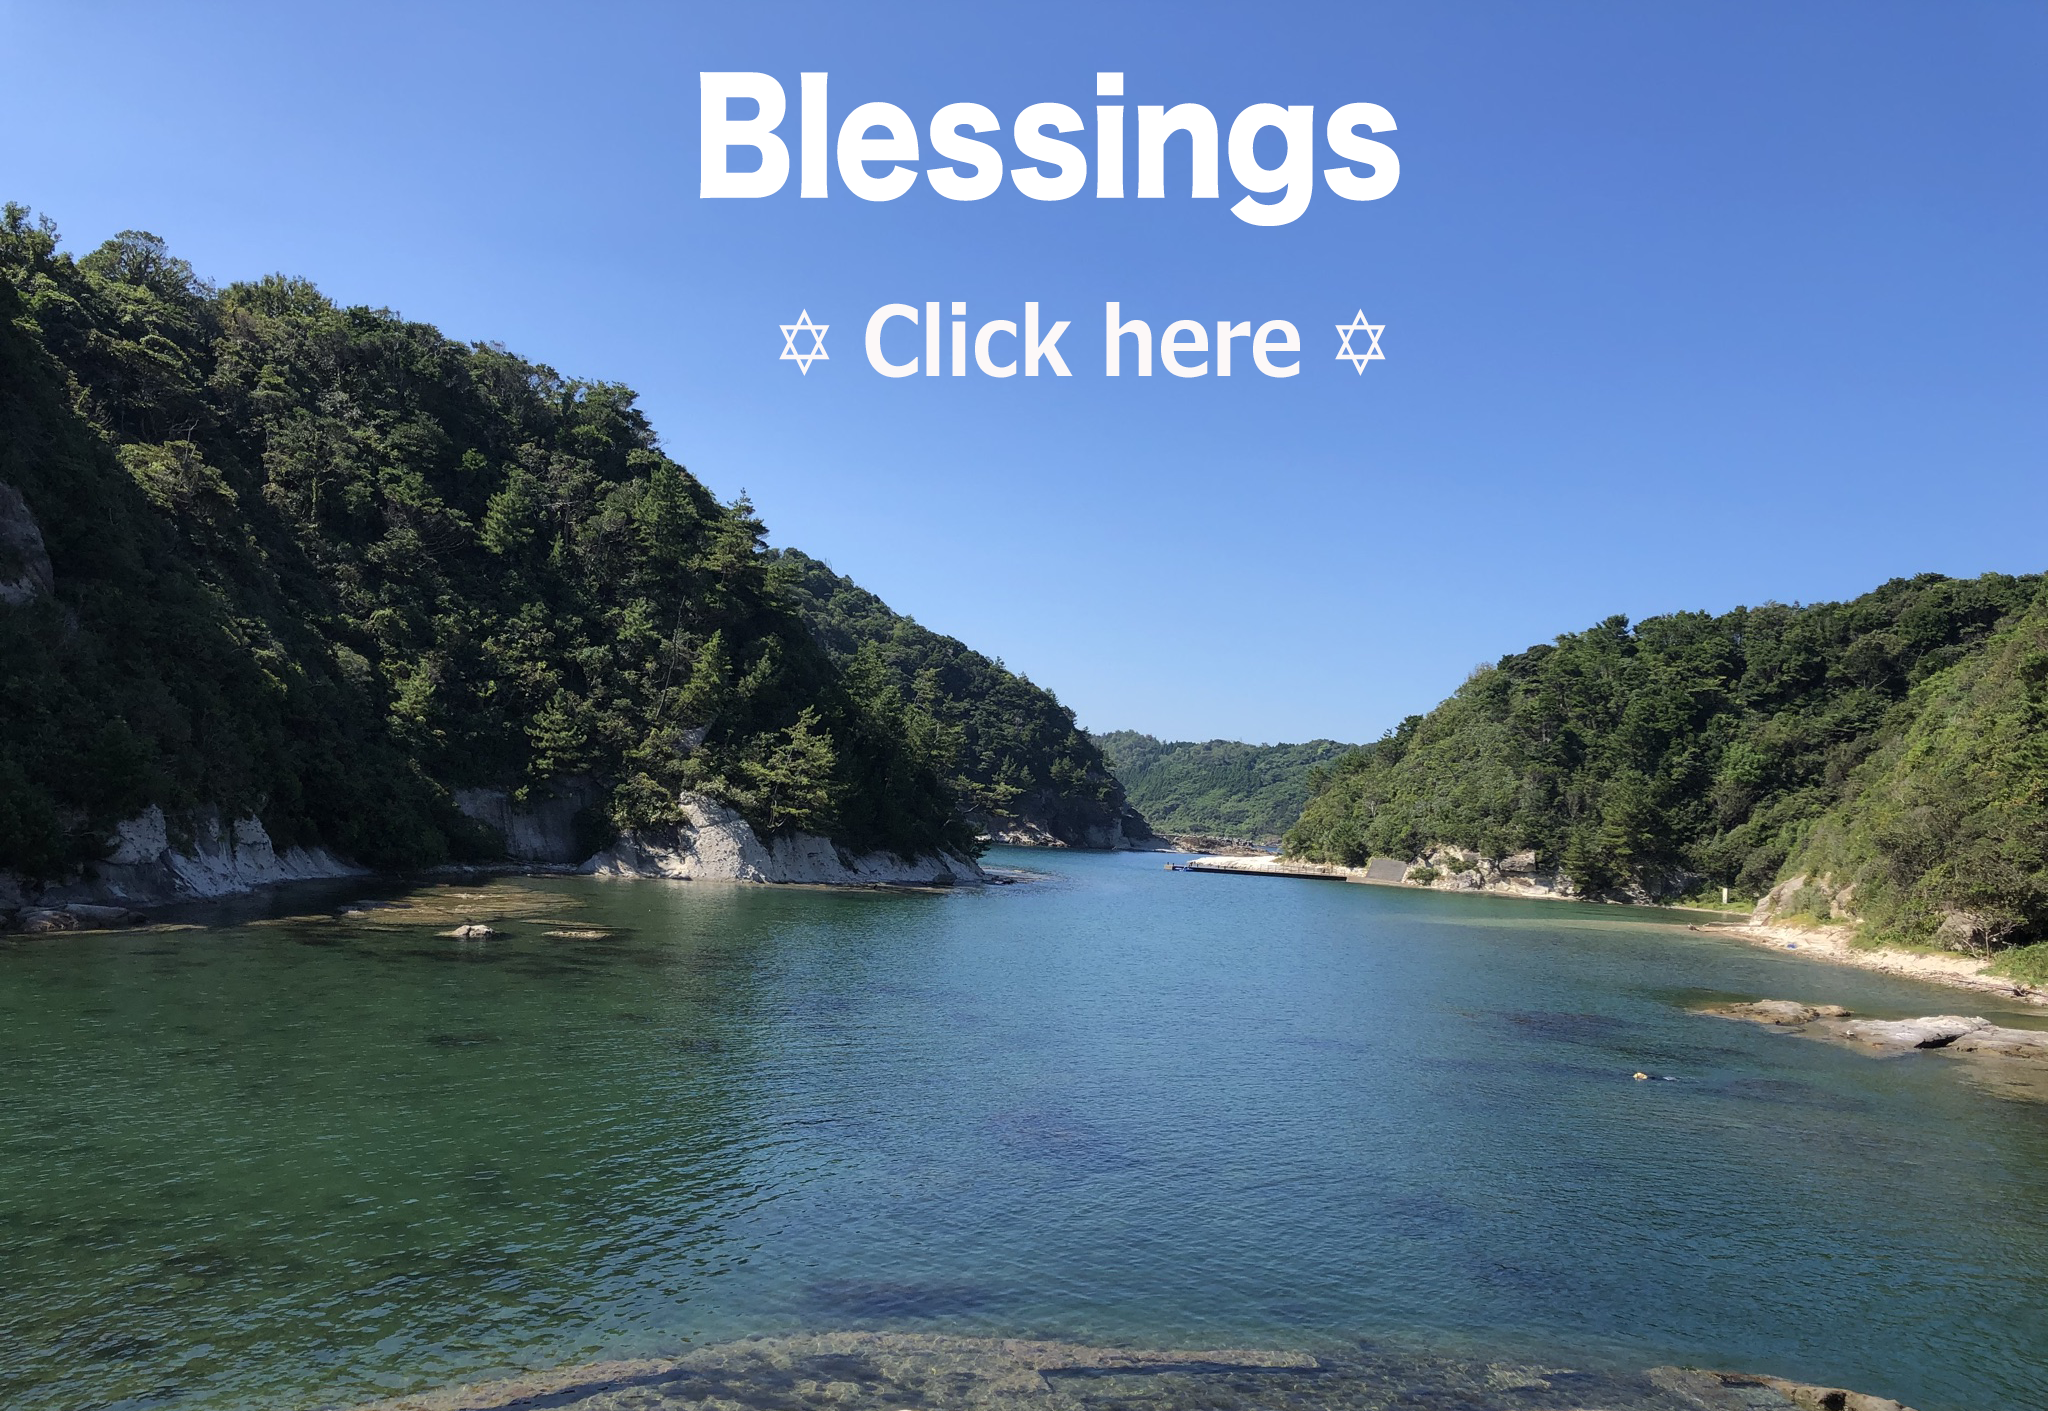 Blessings at the Sea